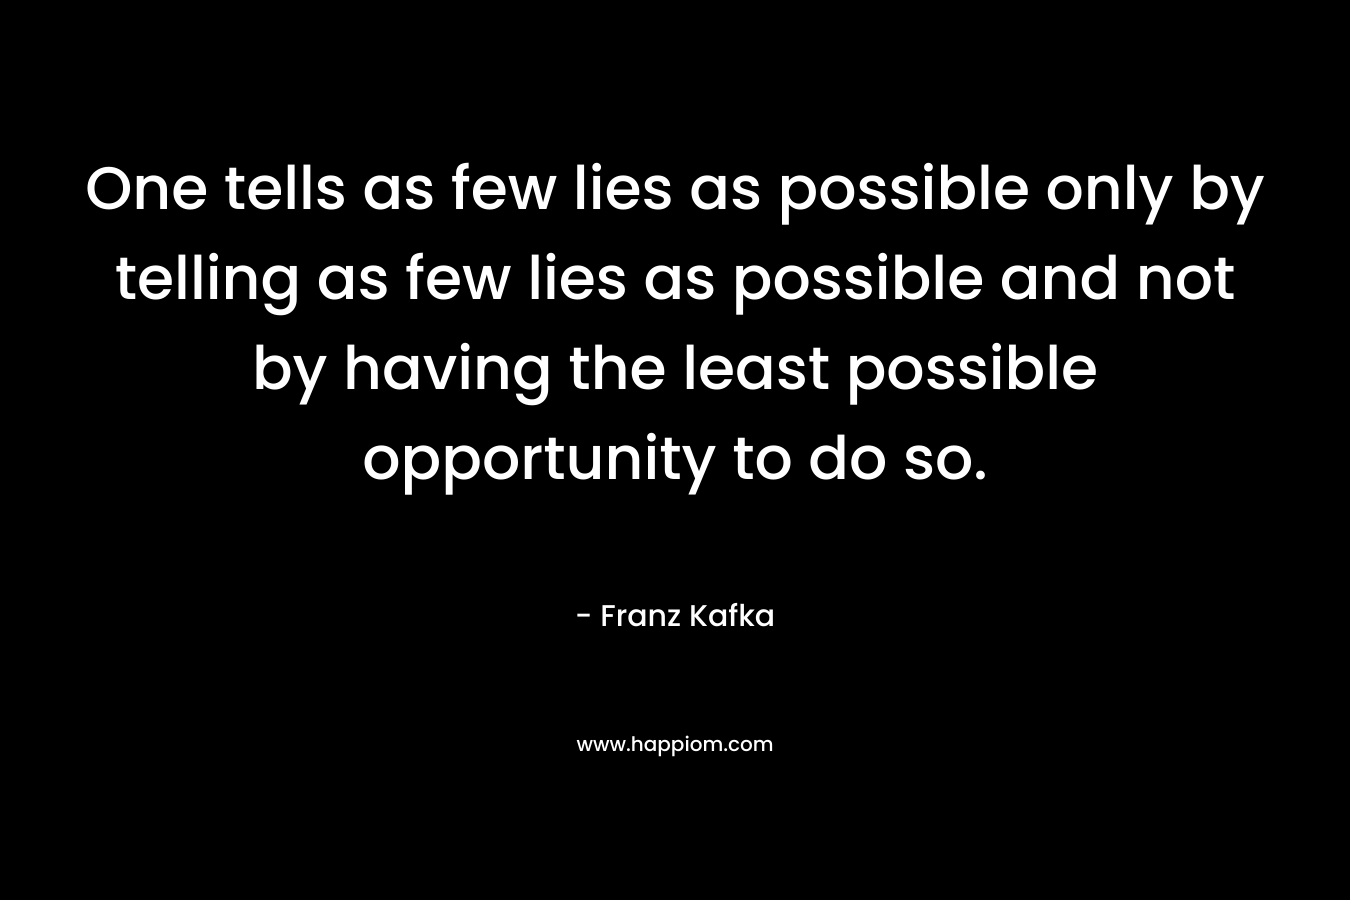 One tells as few lies as possible only by telling as few lies as possible and not by having the least possible opportunity to do so.